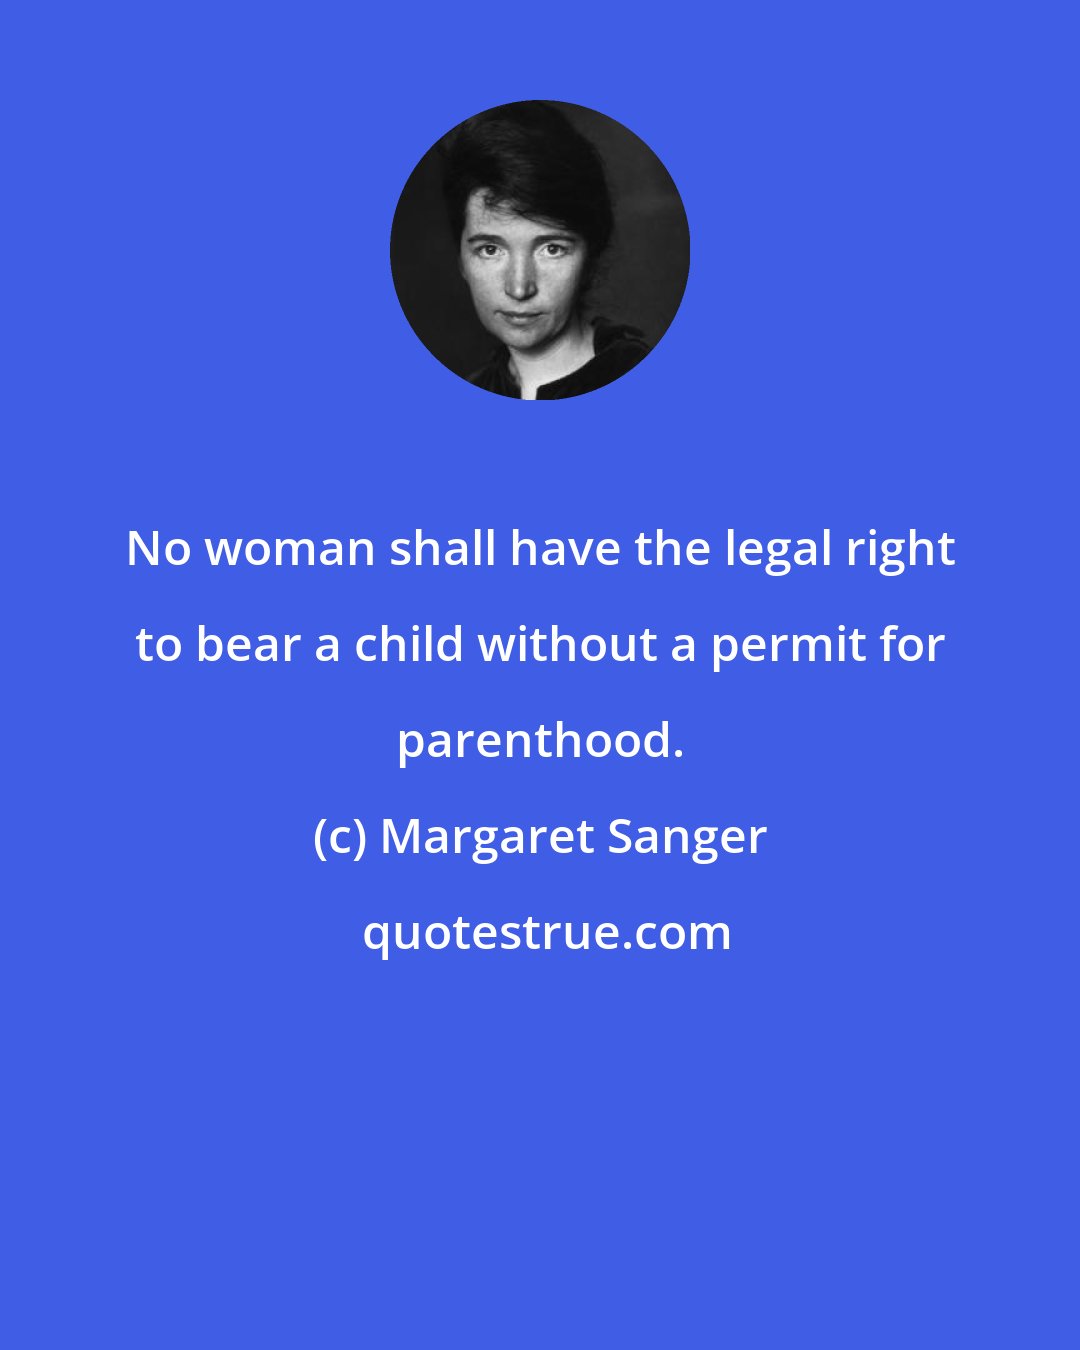 Margaret Sanger: No woman shall have the legal right to bear a child without a permit for parenthood.